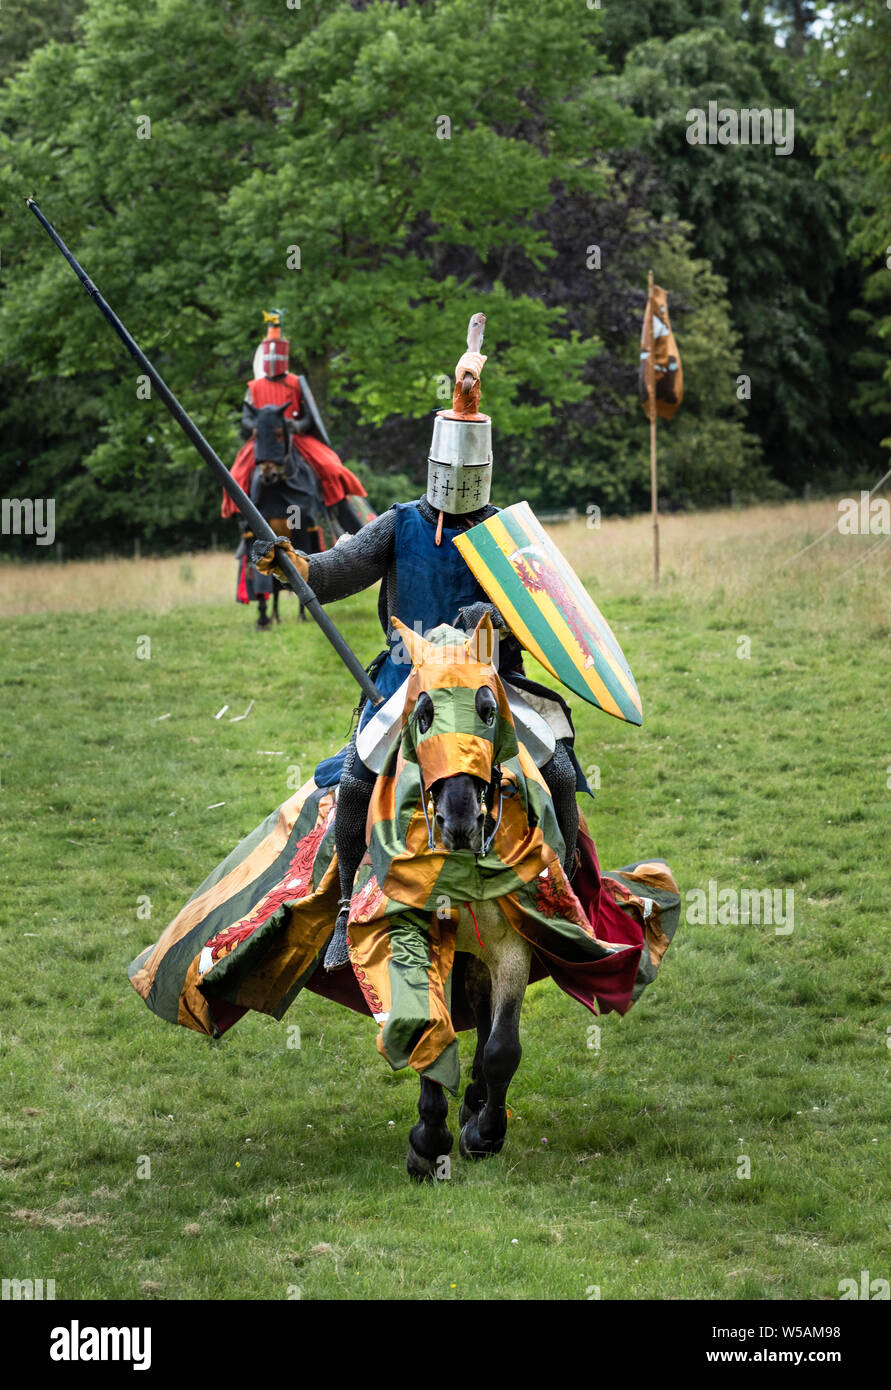 Mounted knights in medieval armour fighting on horseback during jousting demonstration Stock Photo